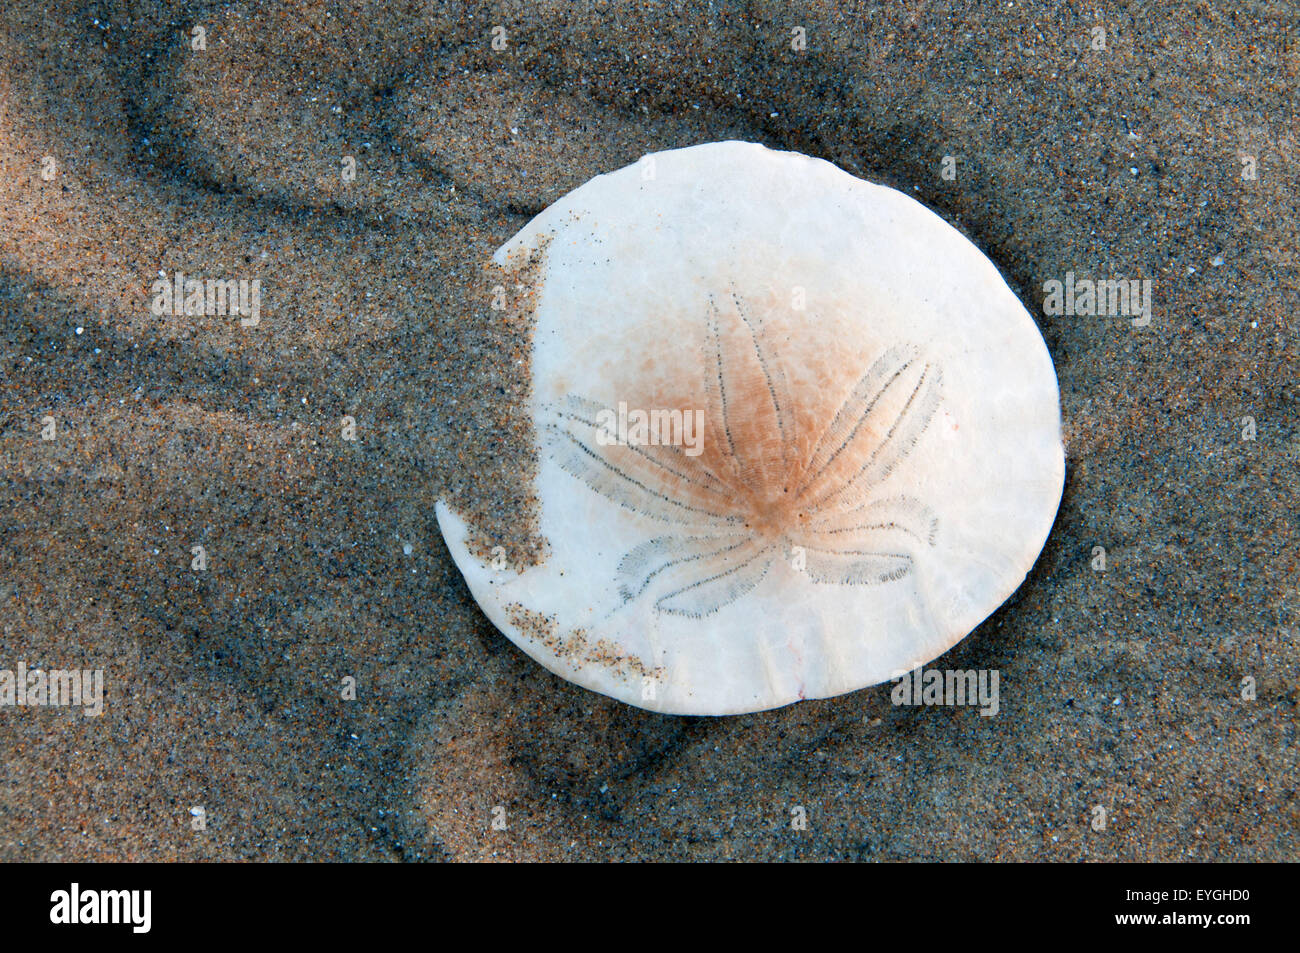 Sand dollar, Cape Lookout State Park, Oregon Stock Photo